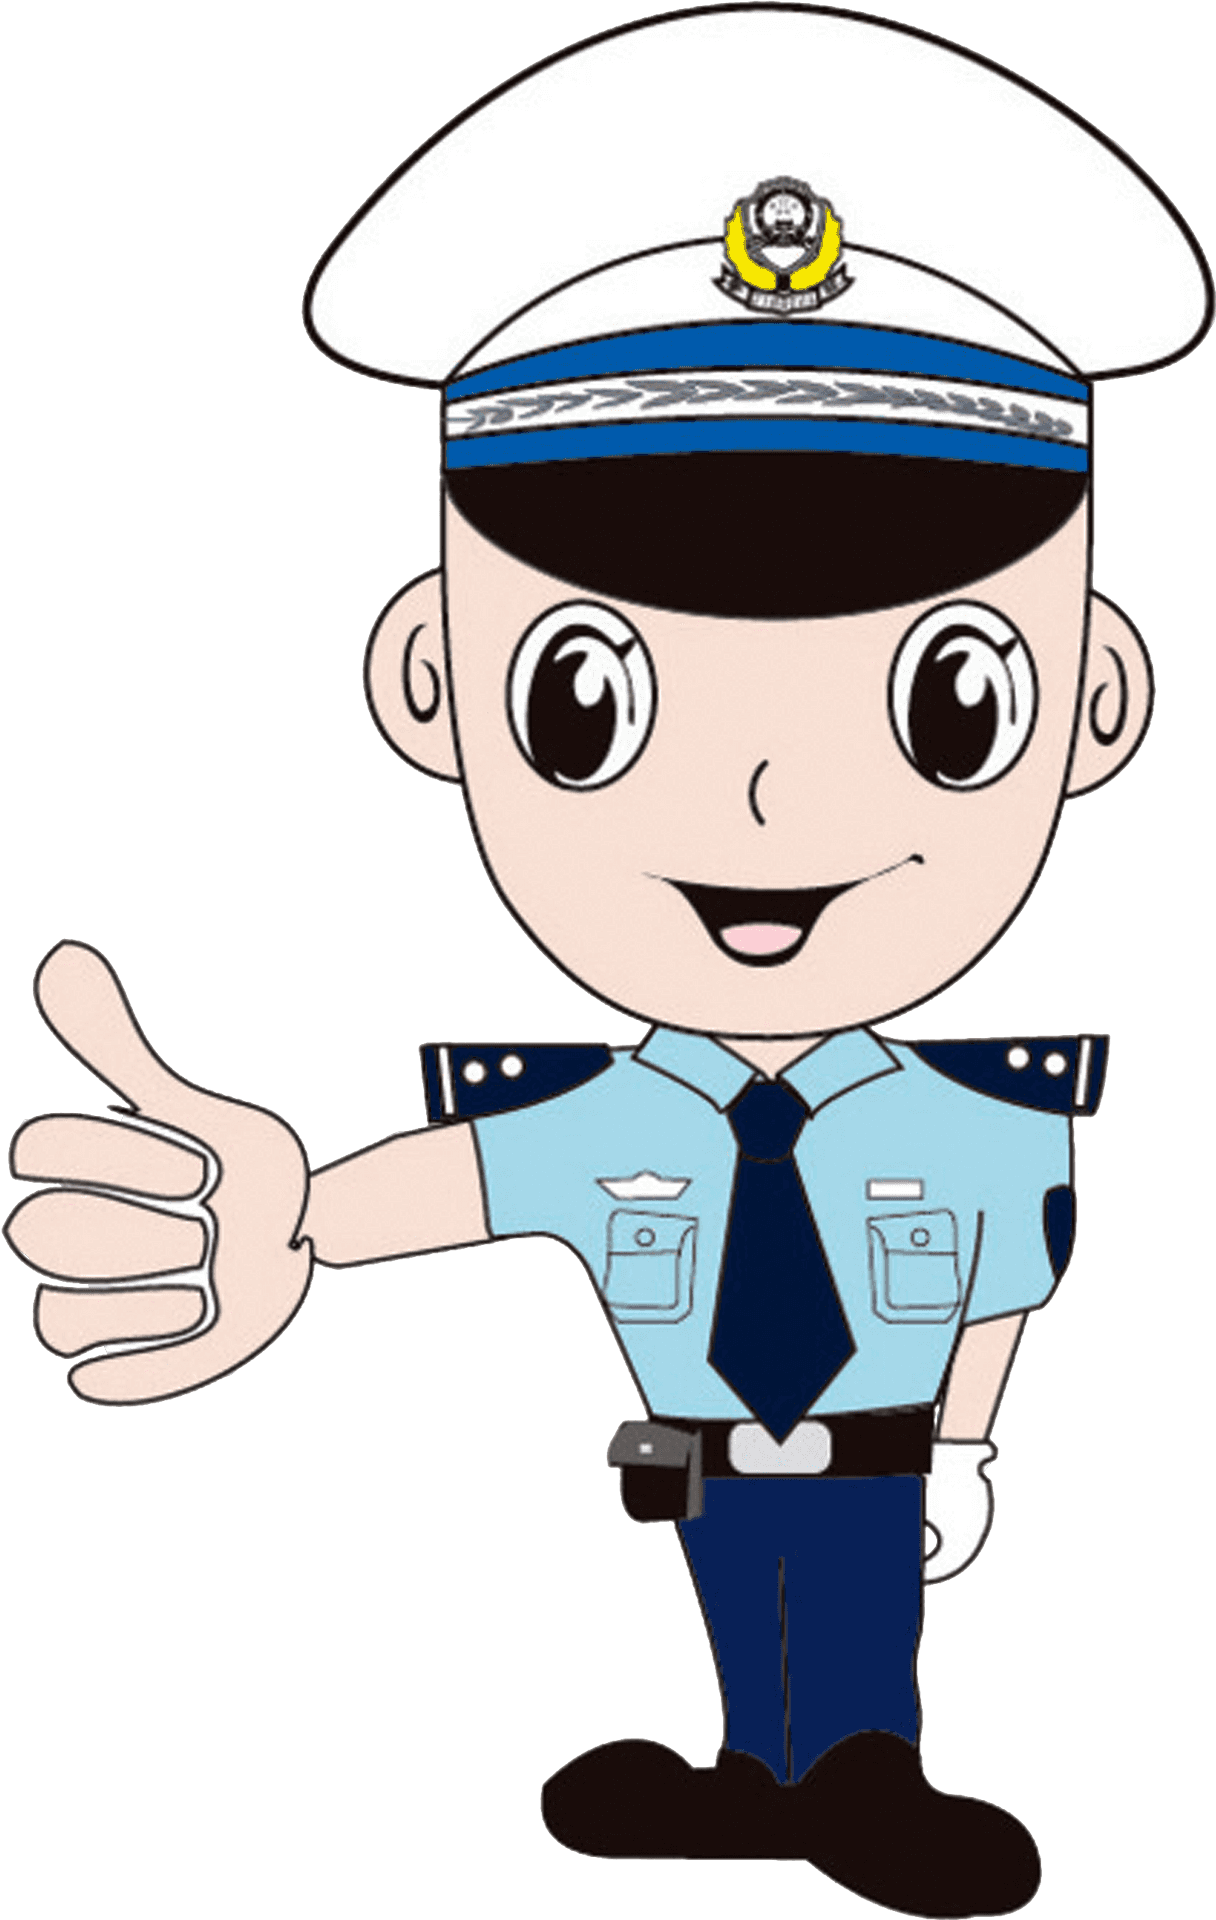 Friendly Cartoon Policeman Giving Thumbs Up PNG image